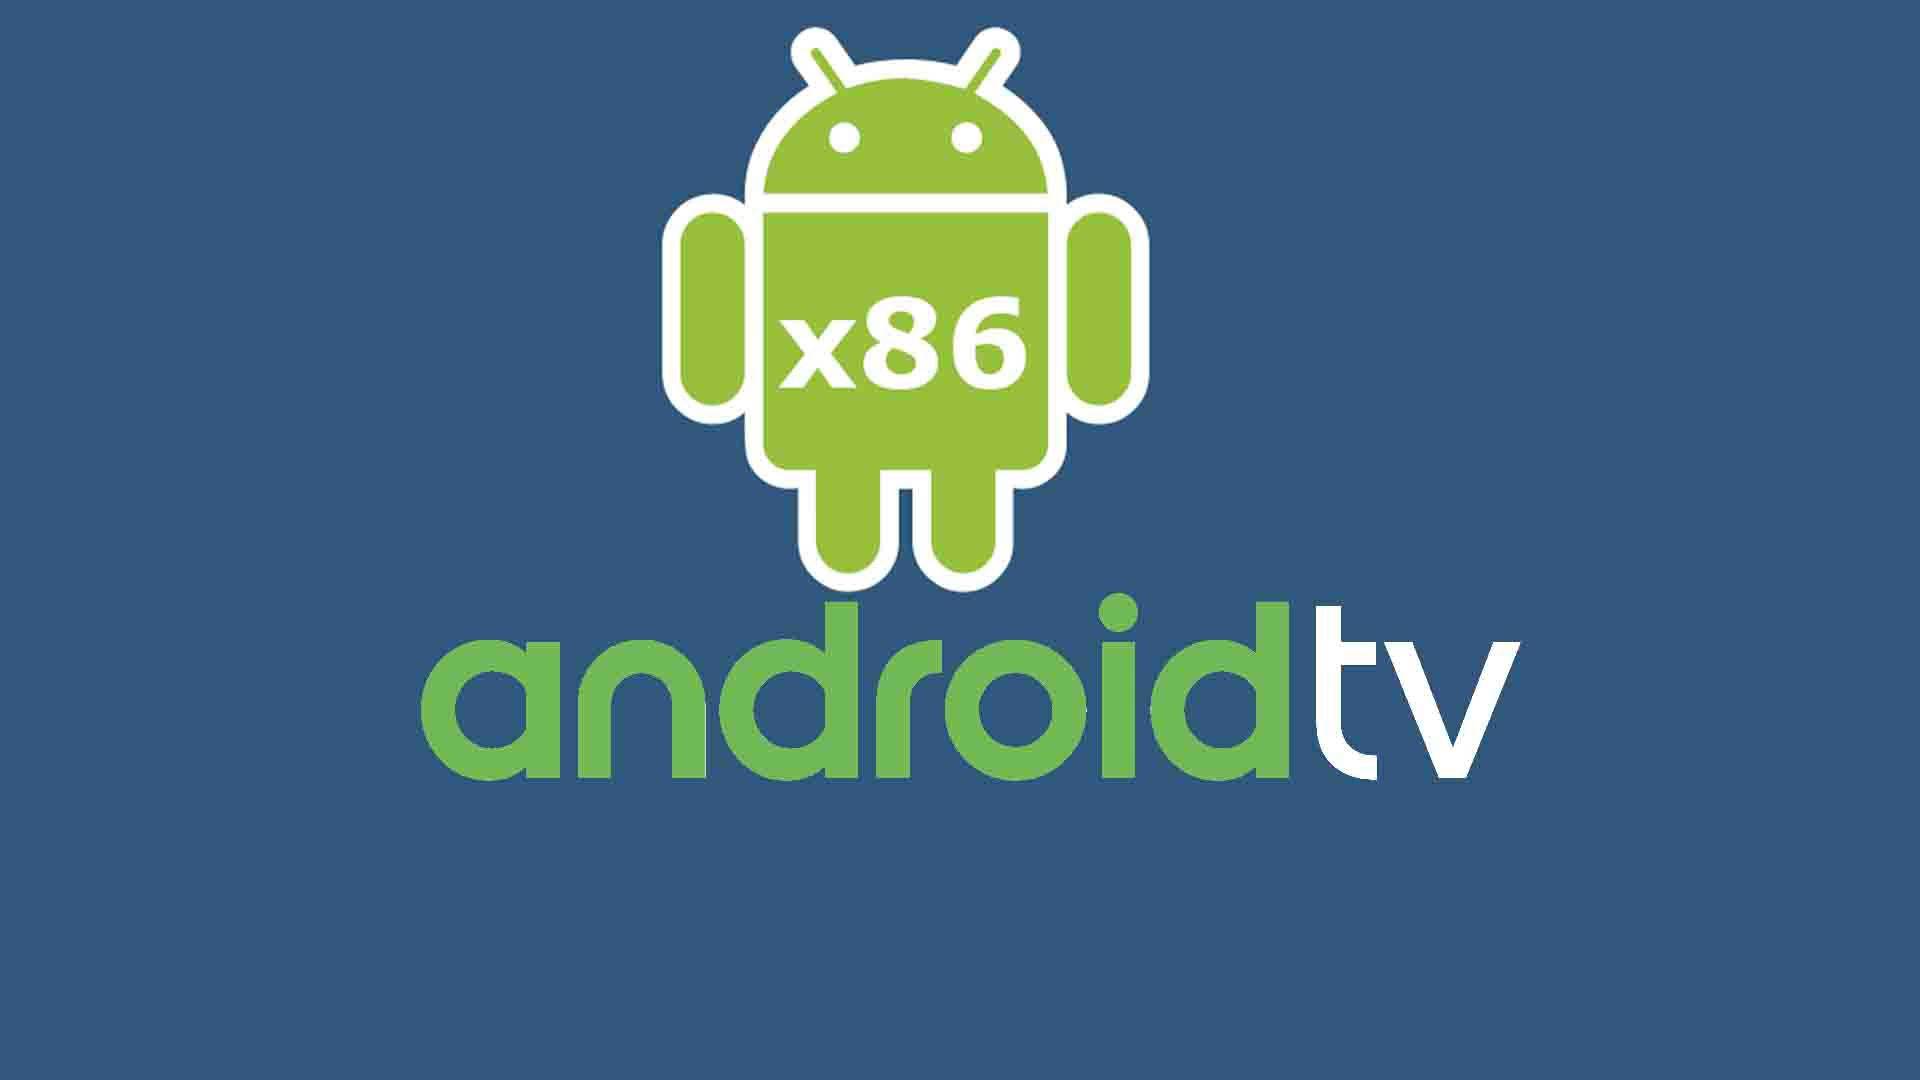 Андроид 86. Android TV x86. Android TV os 9 (pie). Android x86 atv6. Everything андроид